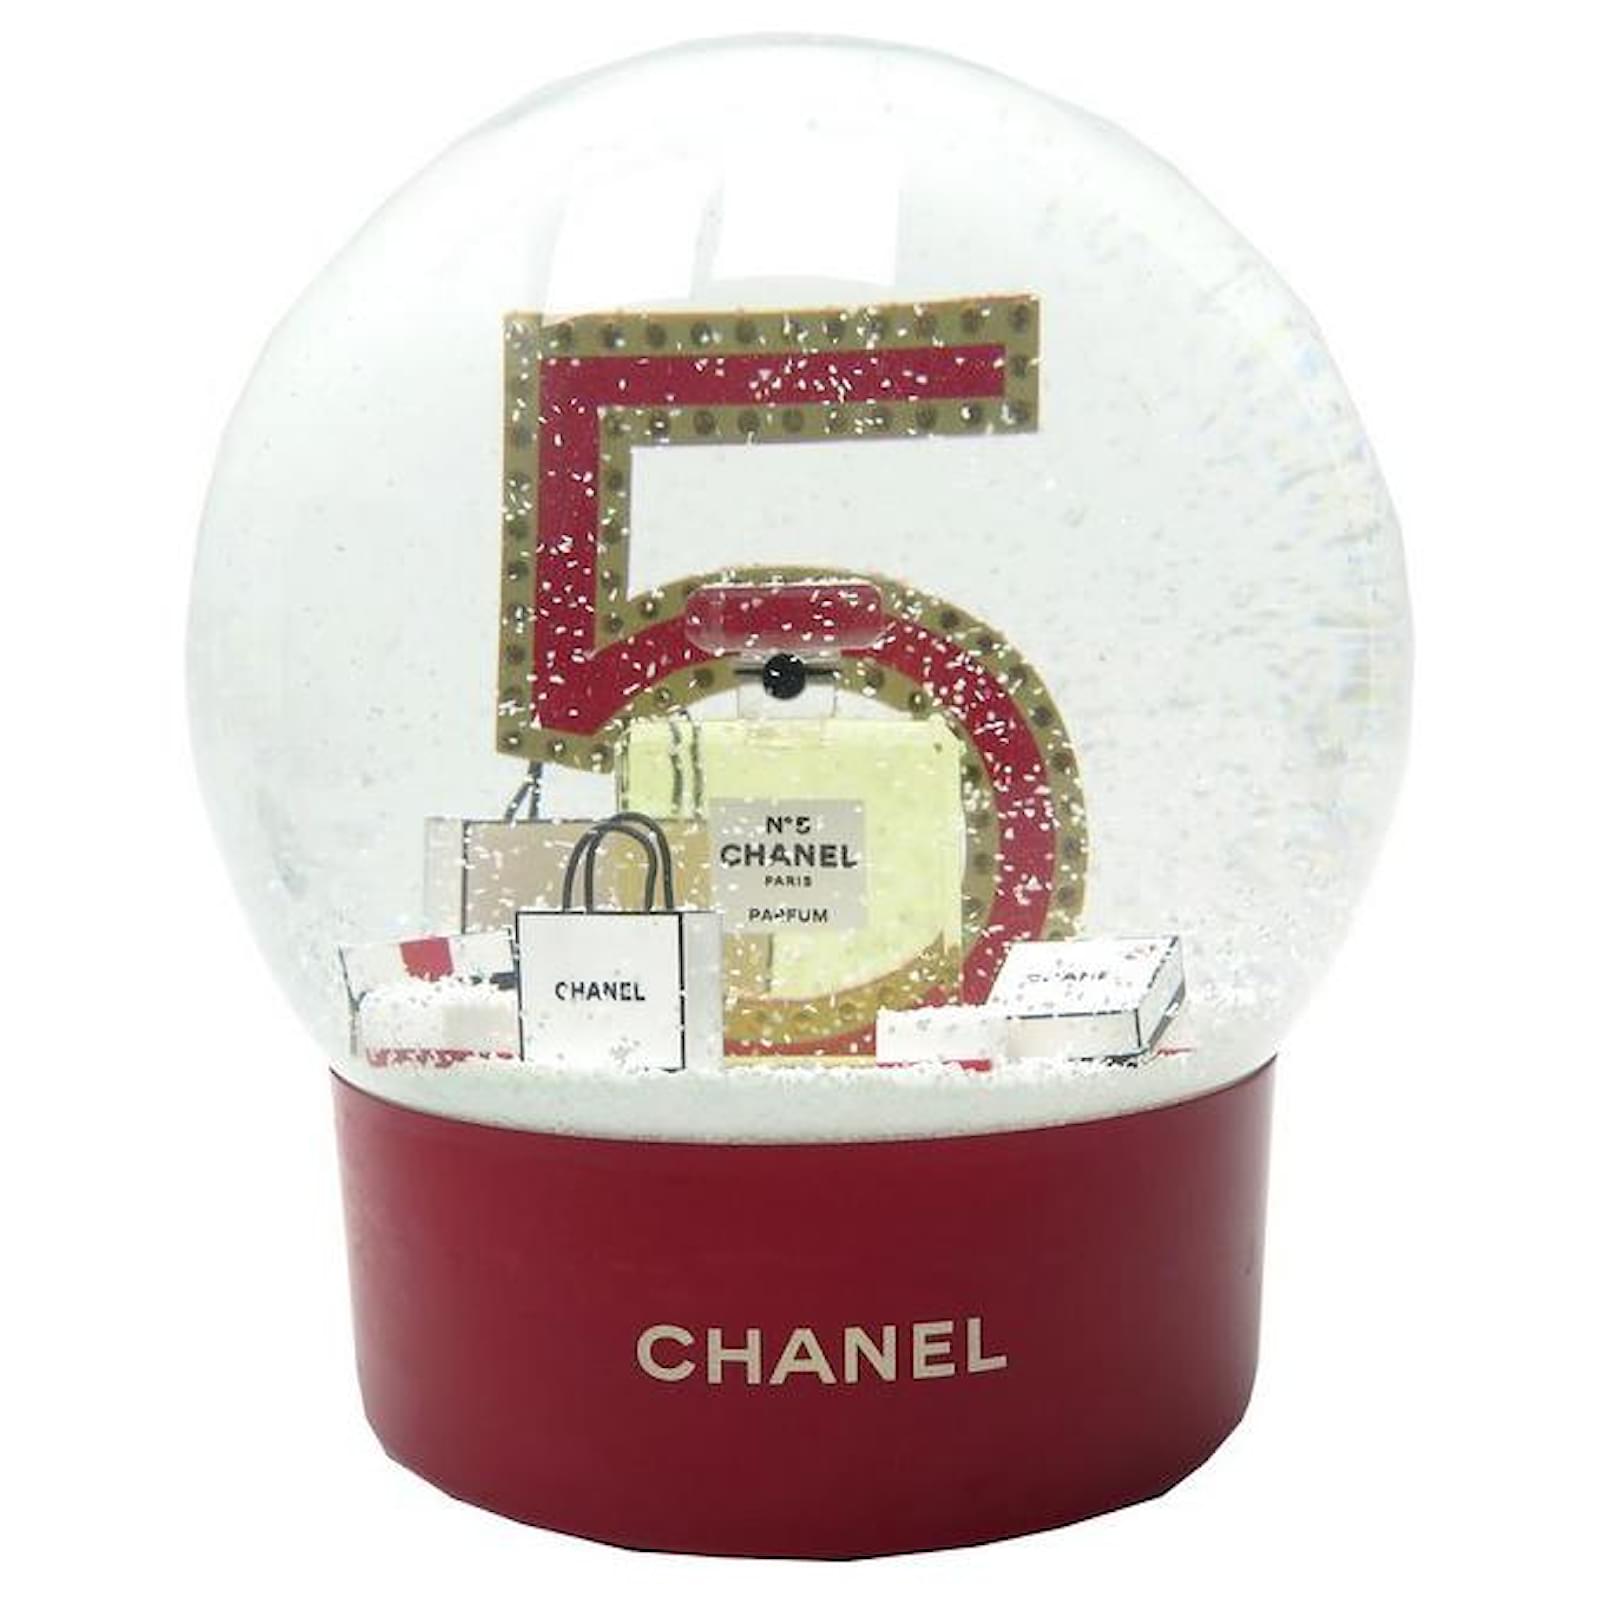 NINE CHANEL PERFUM NUMBER SNOW BALL 5 LARGE RED USB RECHARGEABLE